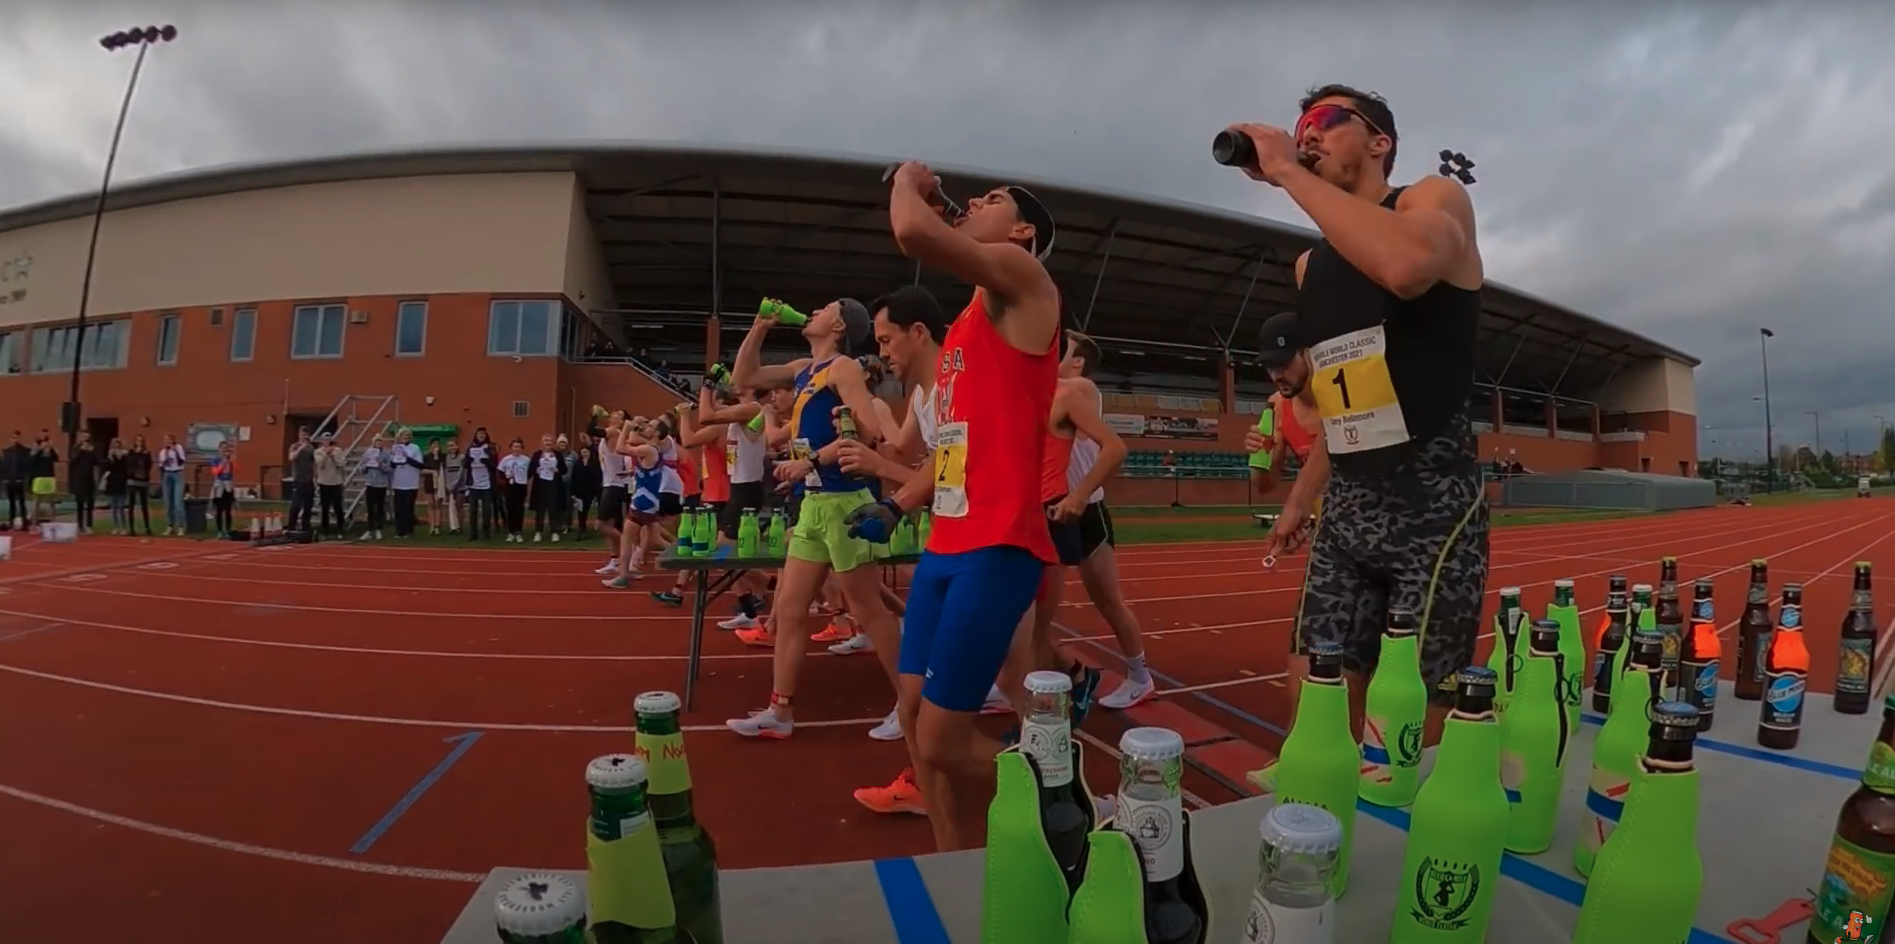 Man sets world record for running a mile while drinking